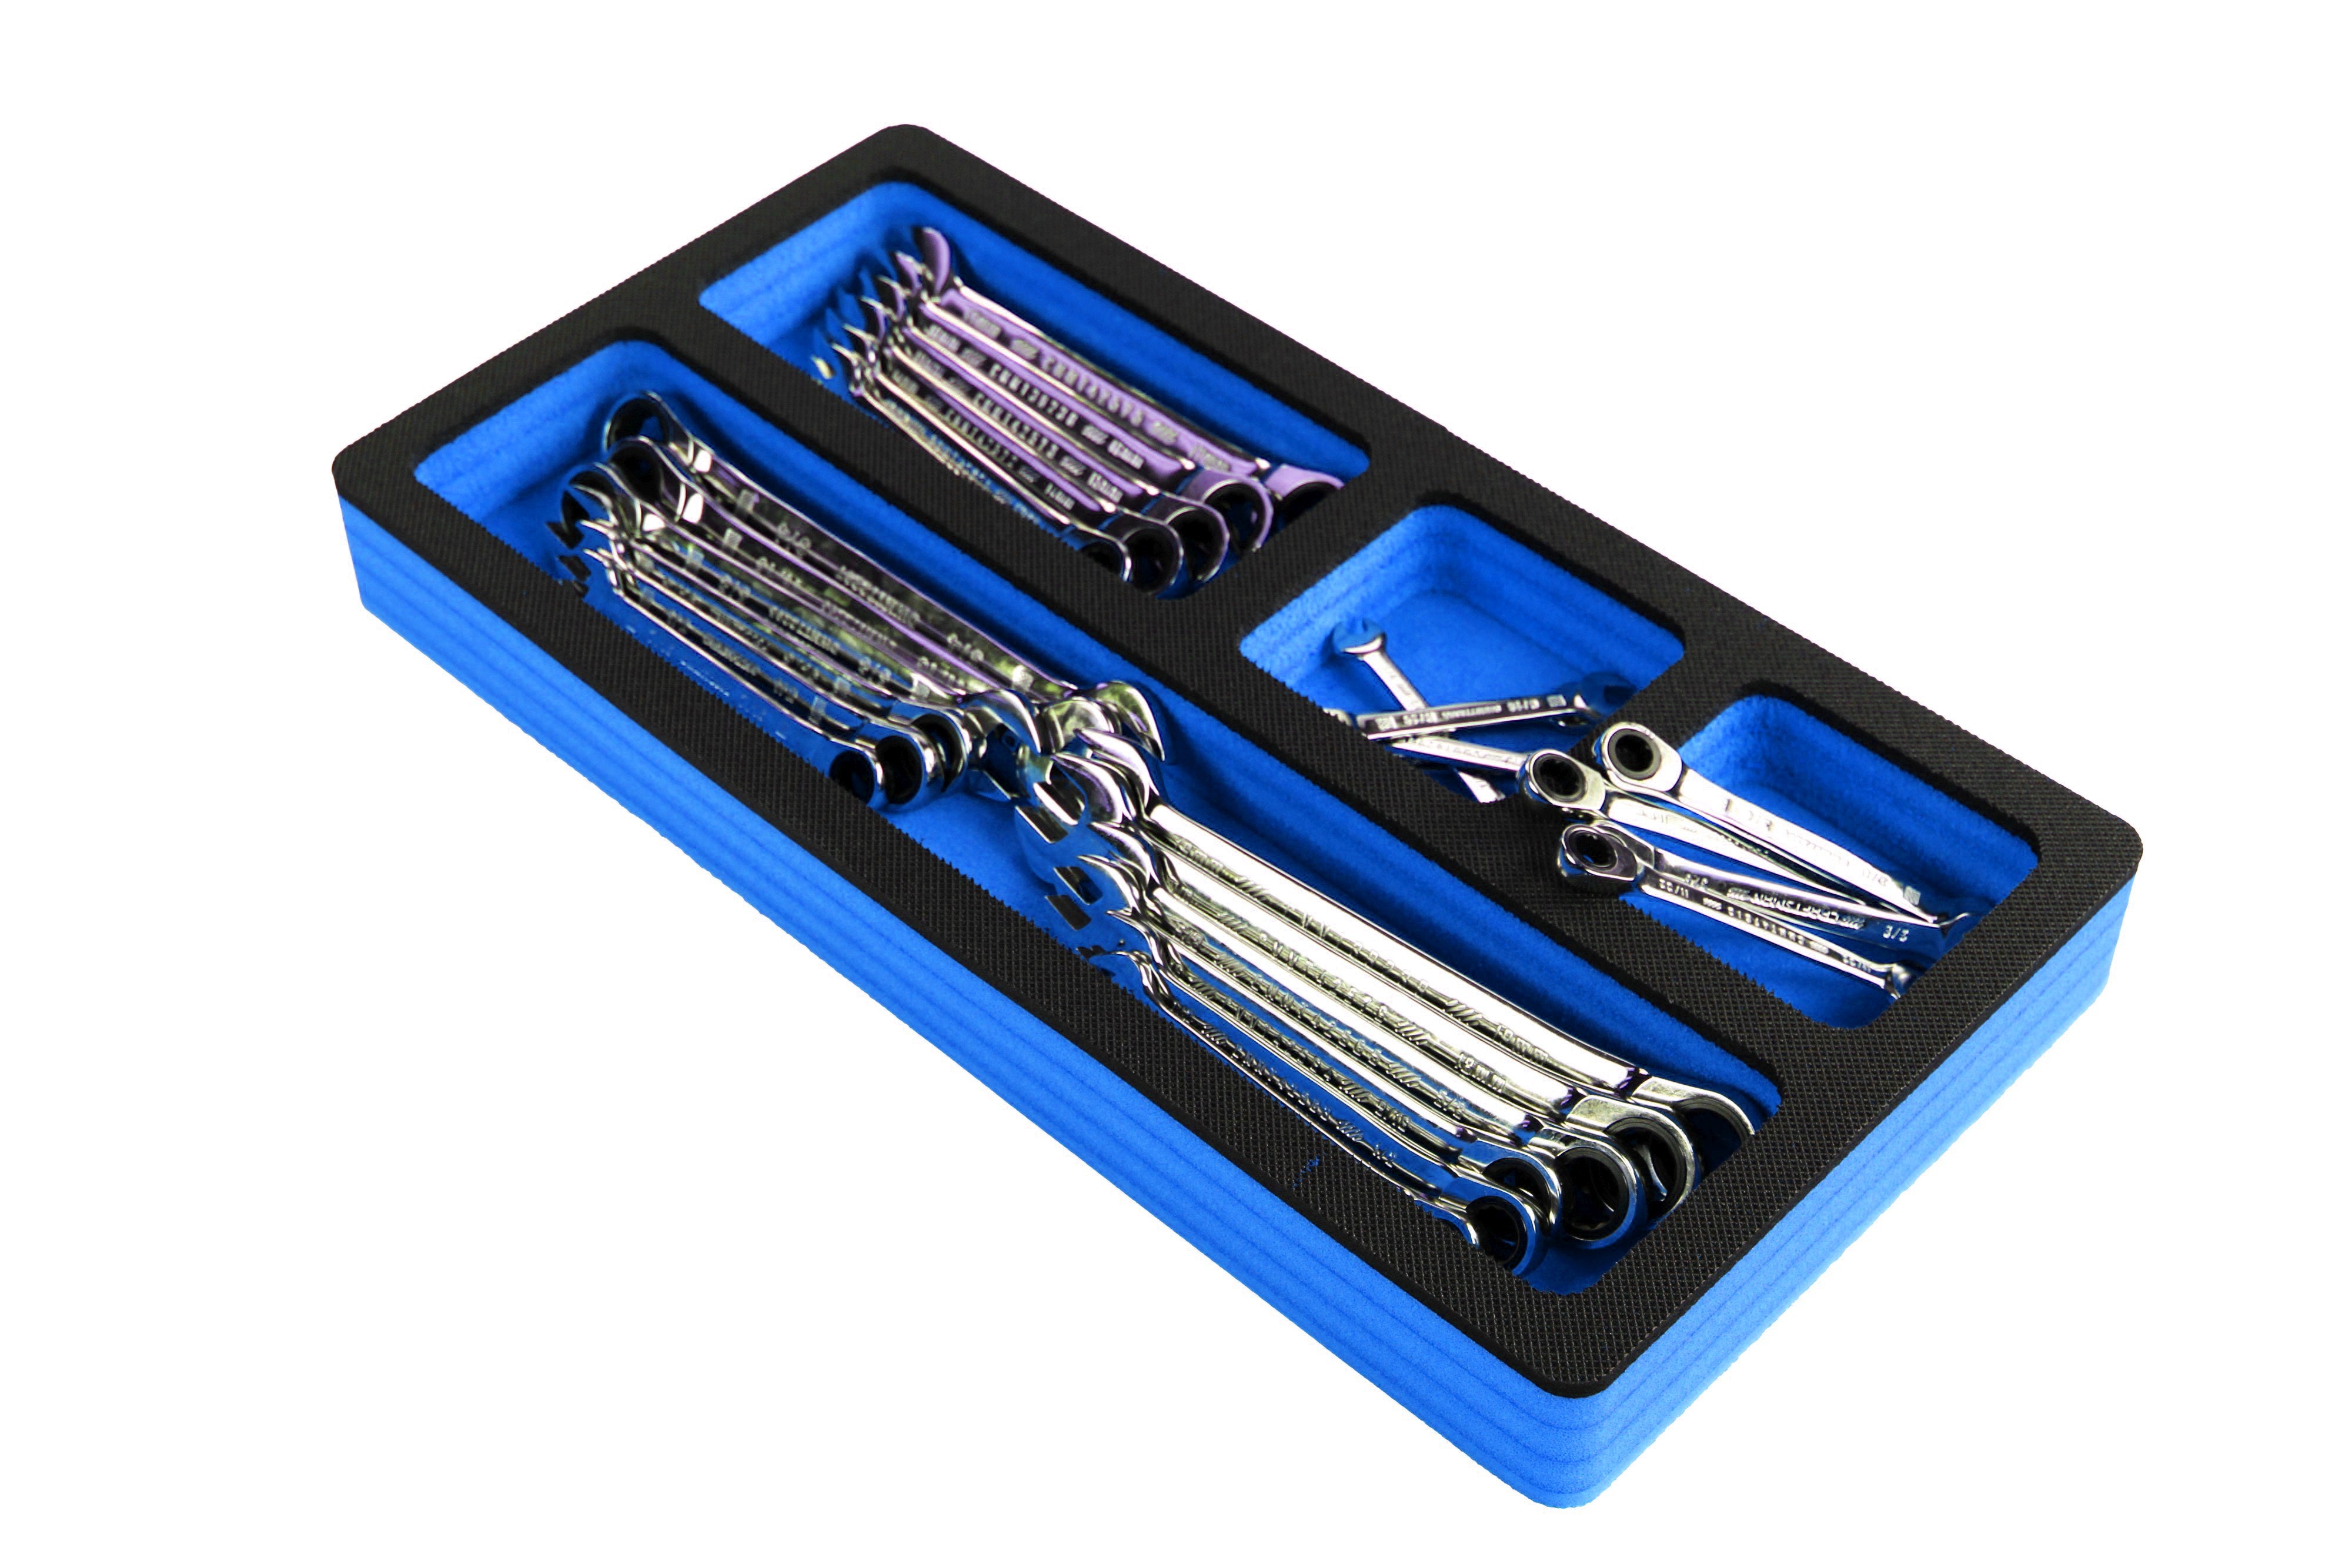 Tool Drawer Organizer Insert Blue and Black Durable Foam Strong Non-Slip Anti-Rattle Bin Holder Tray 20 x 10 Inches 4 Pockets Fits Craftsman Husky Kobalt Milwaukee and Many Others